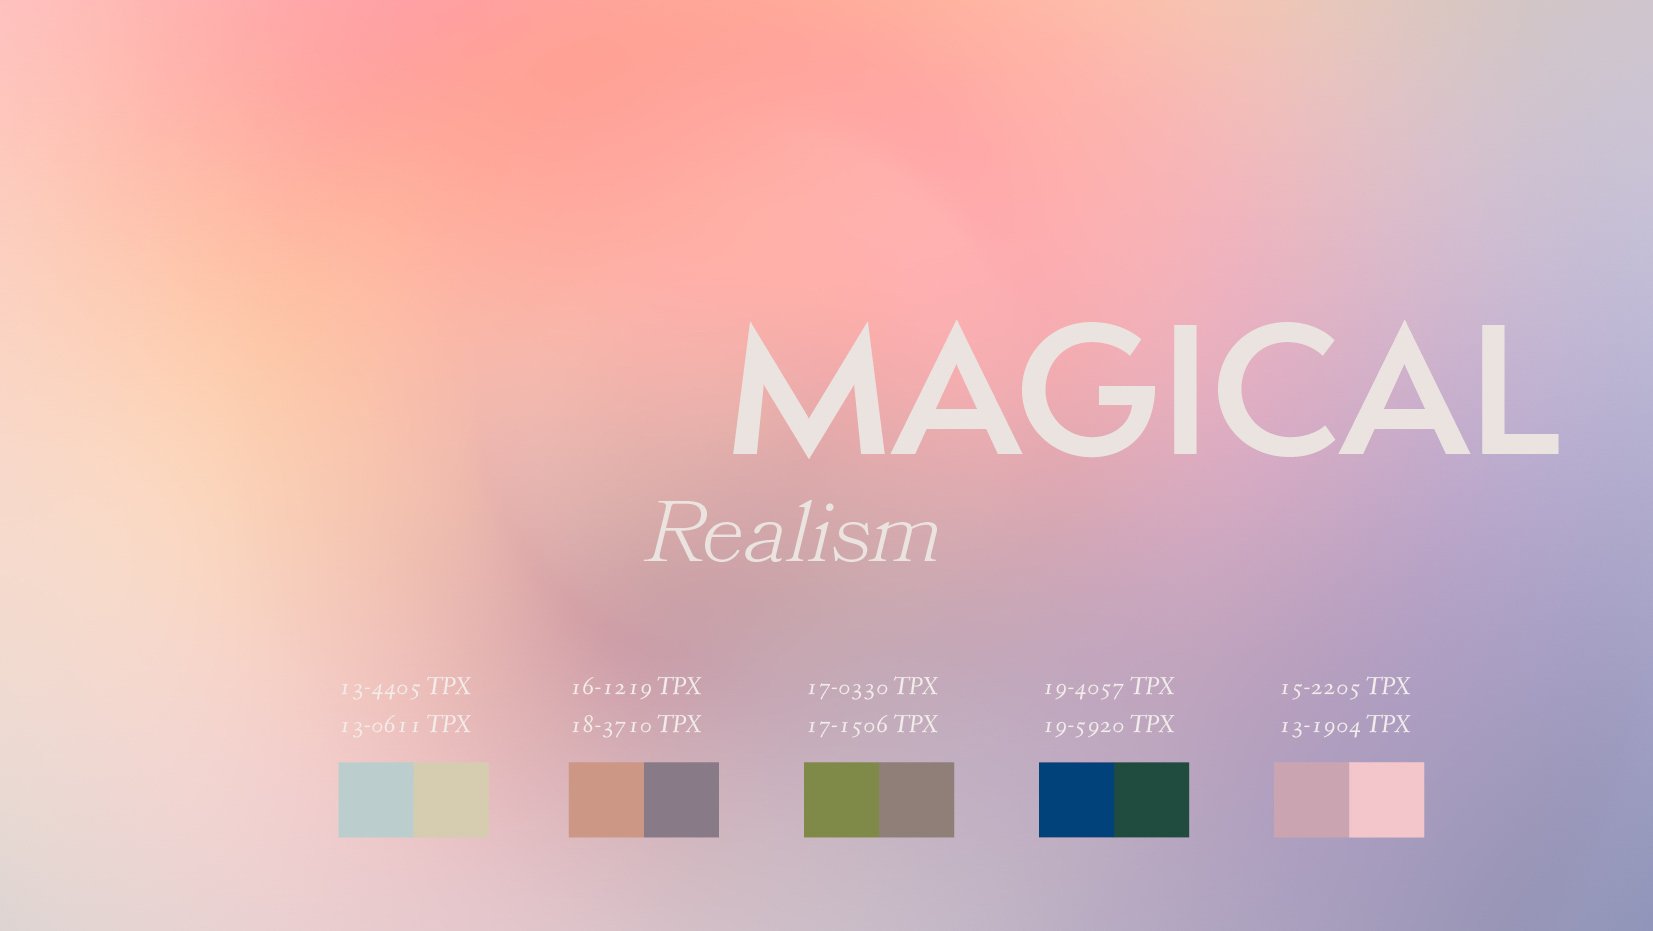 magical realism 2022 trend cover